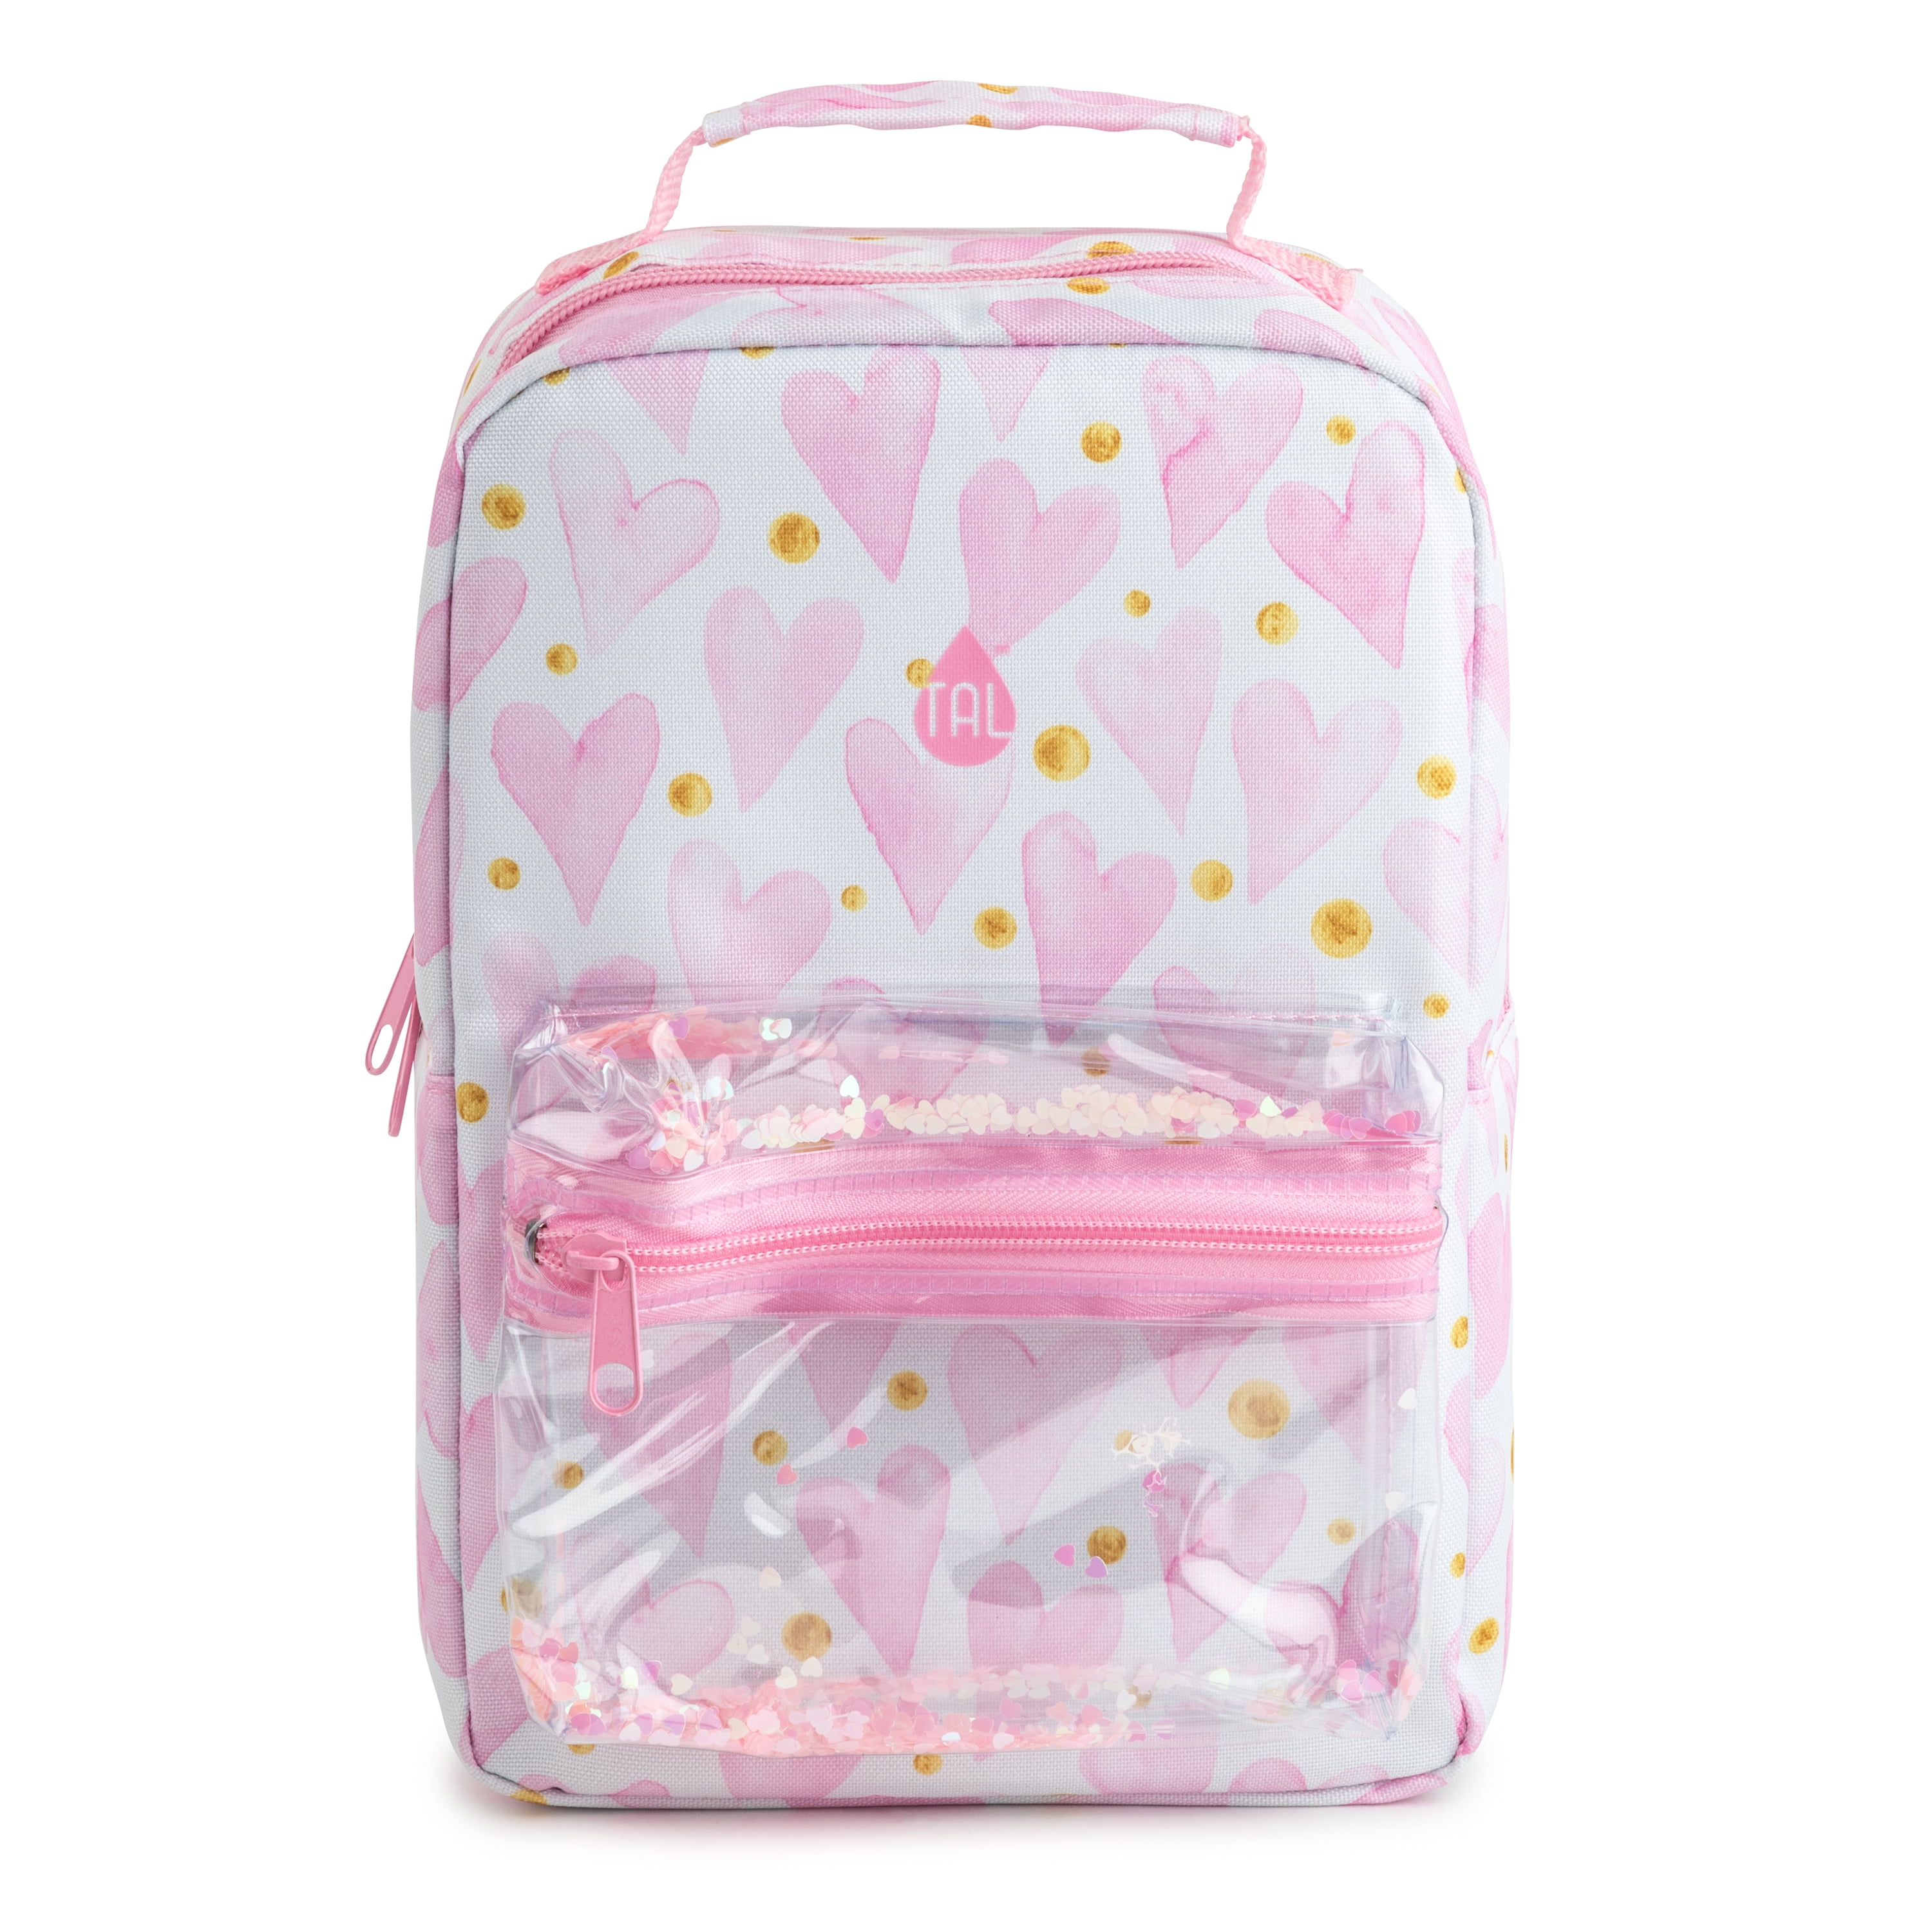 Pink Lunch Bag for Kids Women New Portable Zipper Thermal Food Bags with  Transparent Front Pocket Thicken Cartoon Lunch Box